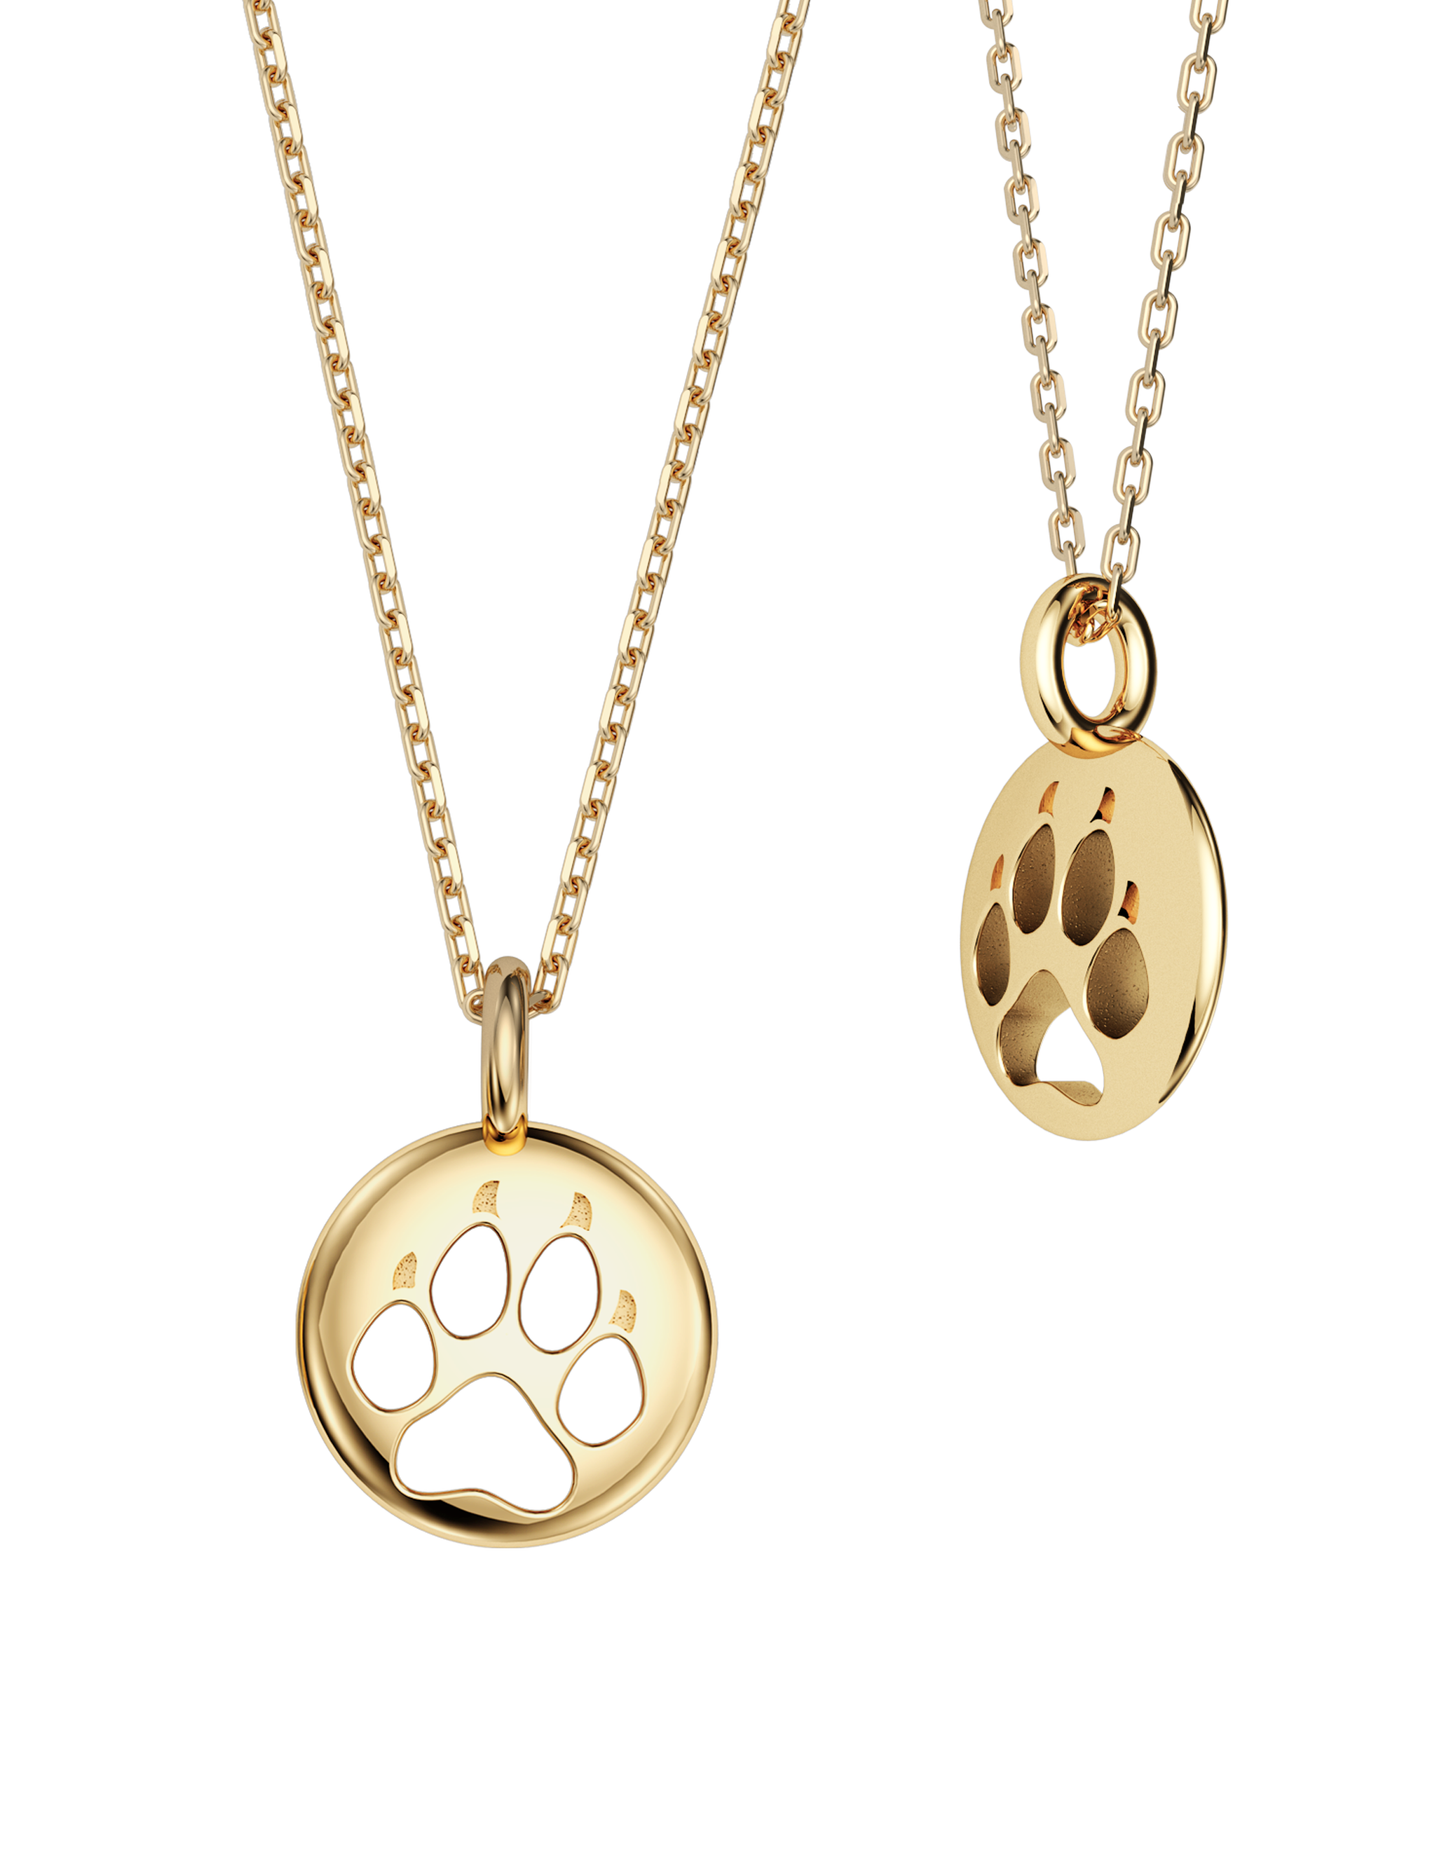 Paw Pendant - Gold - 4 Paws Forever